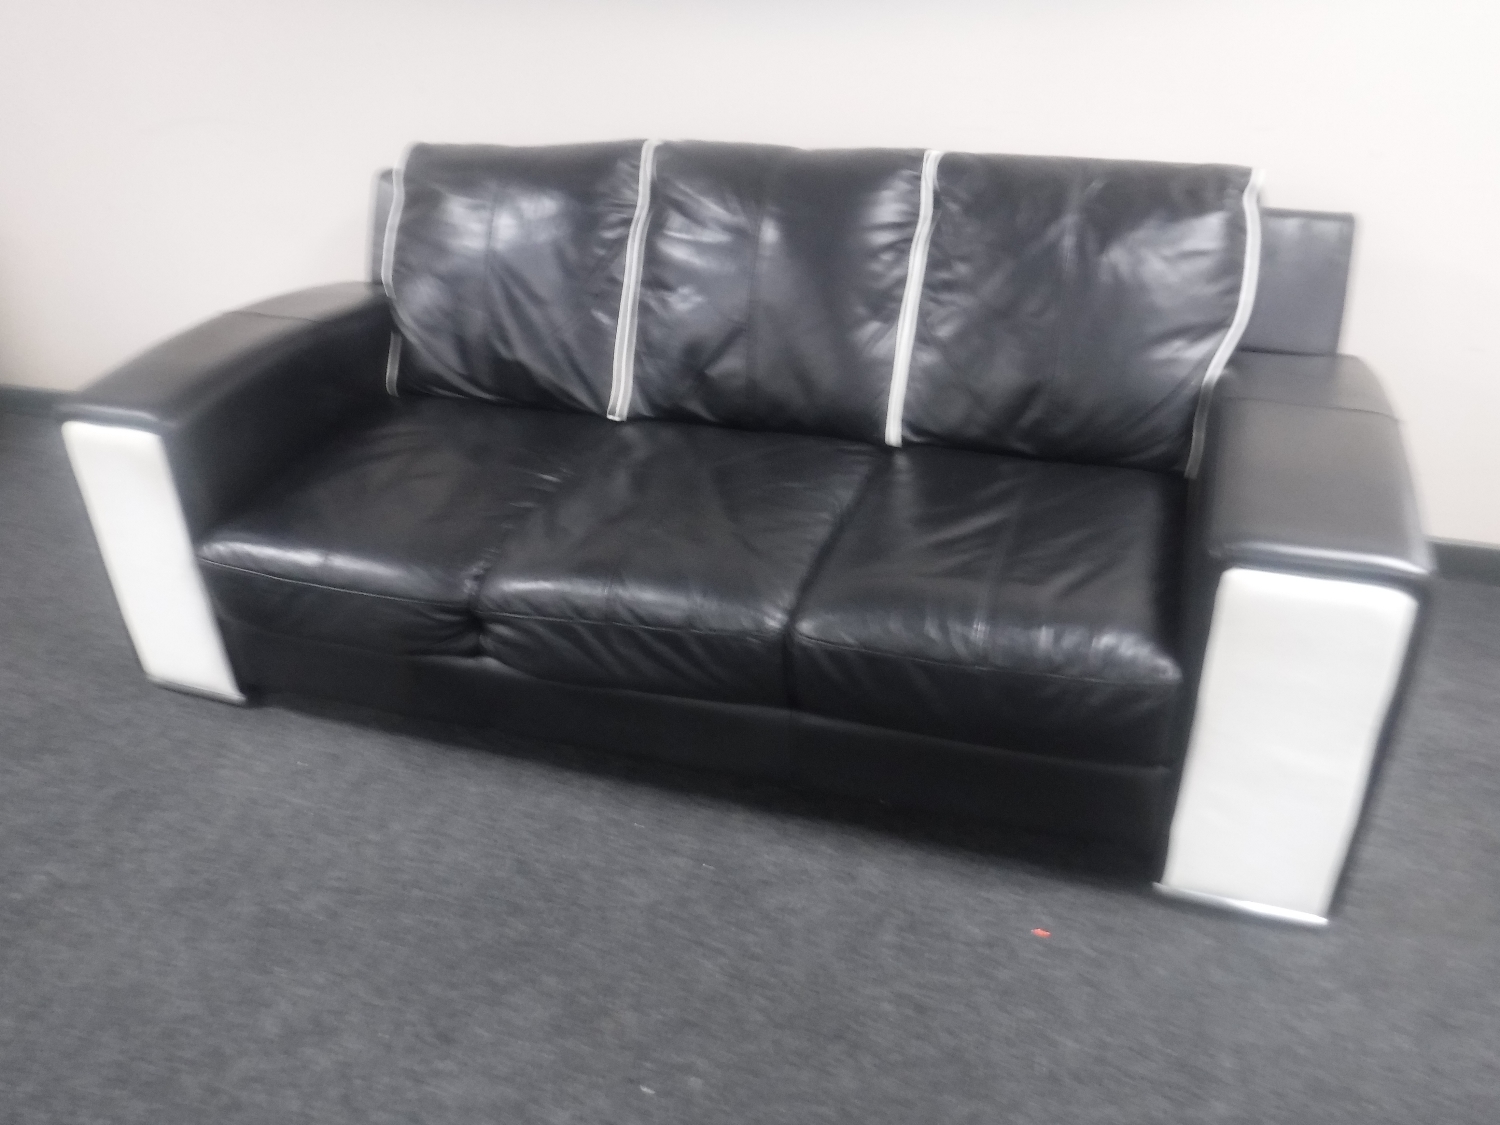 A three seater settee with matching two seater settee upholstered in a two-tone black and white